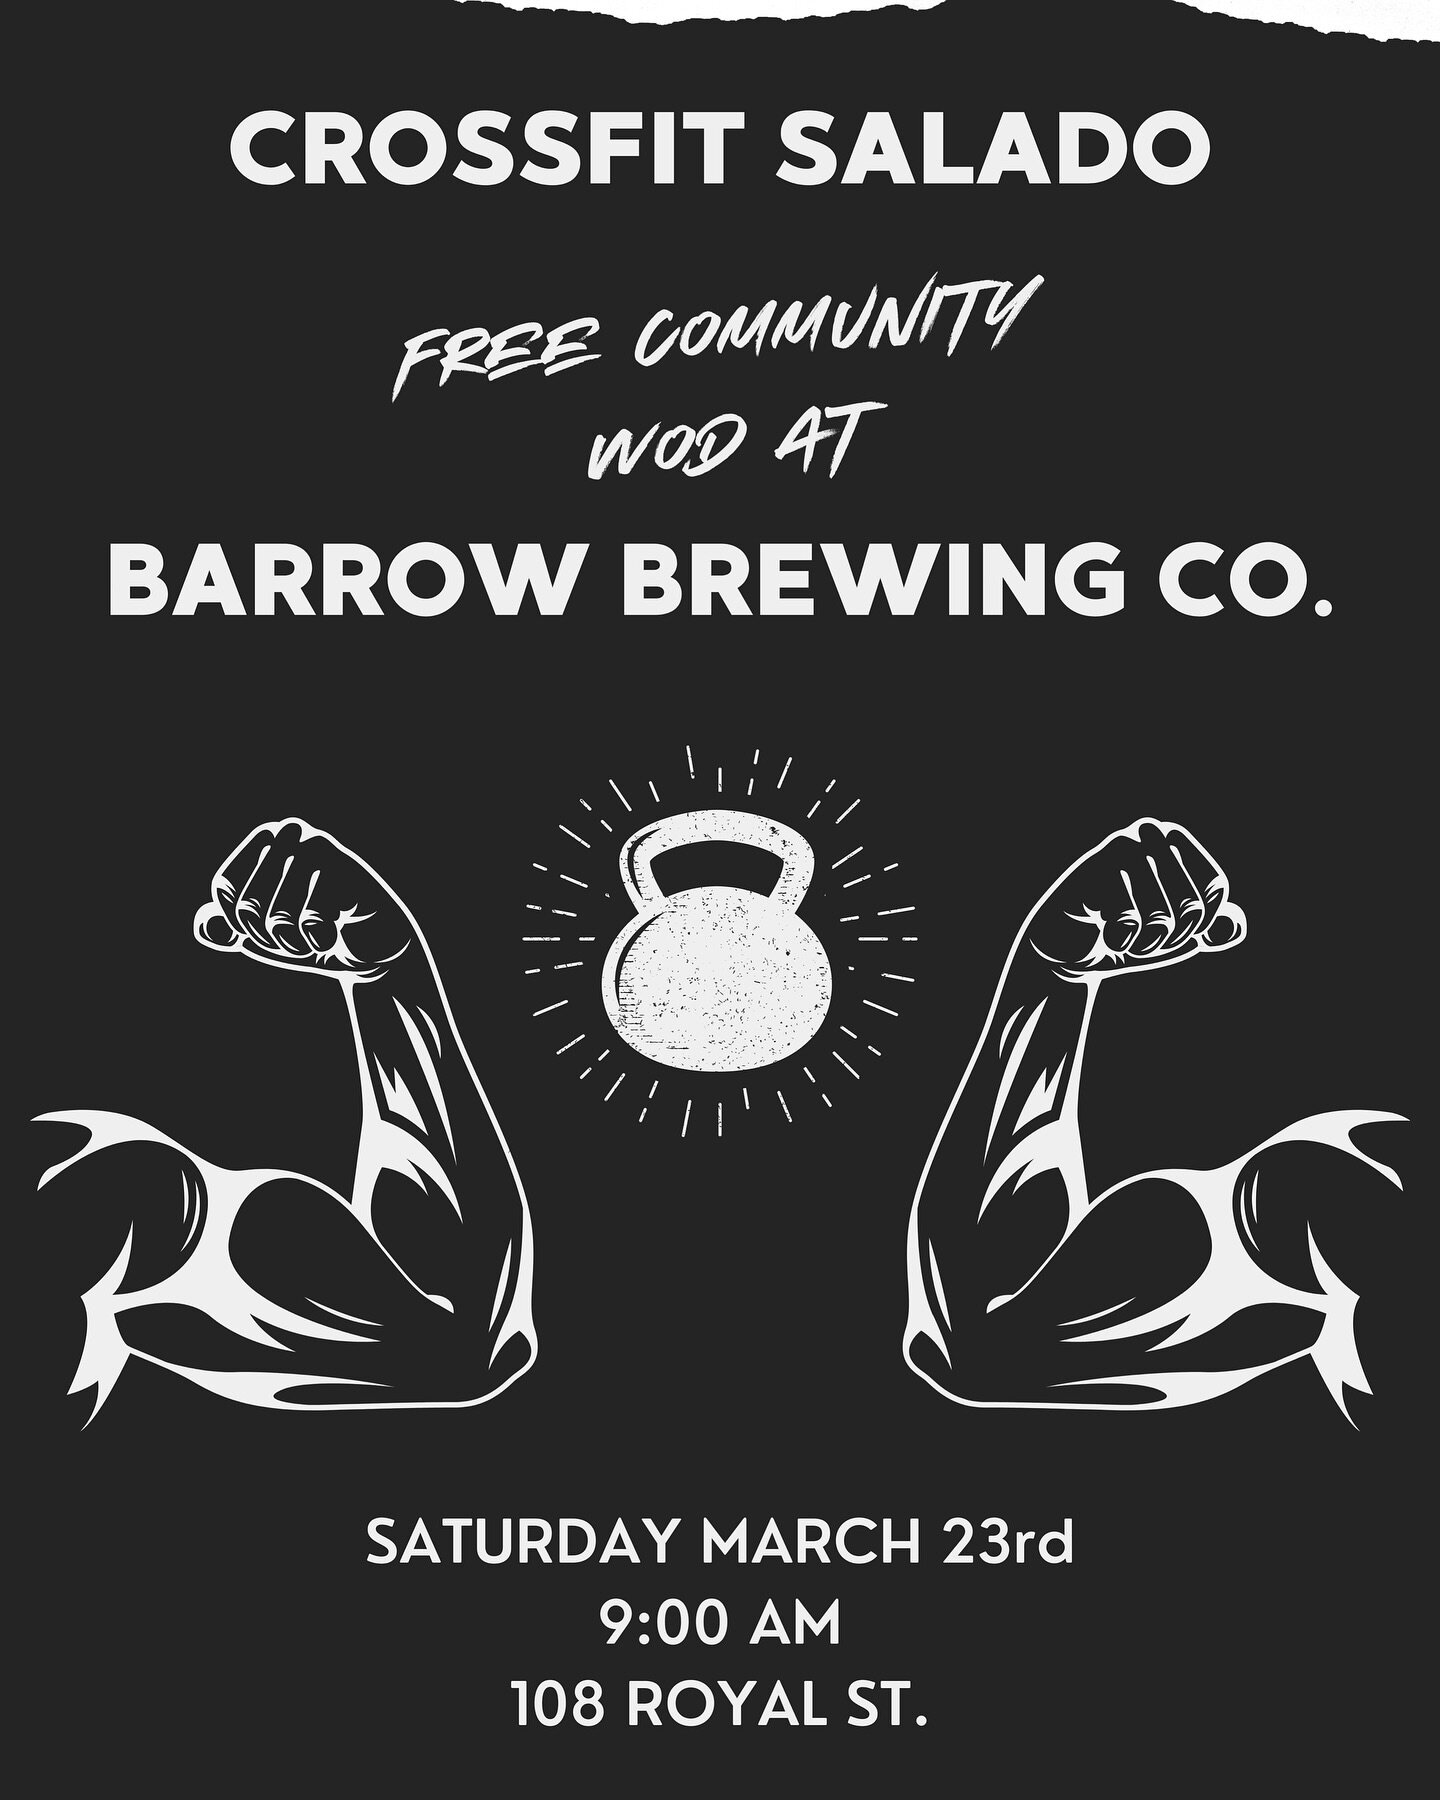 We are so excited to partner with @barrowbeer for a fun free community workout! Please let us know if you plan on coming so we can make sure we have enough equipment. We may also need some help bringing equipment from the gym over to the brewery that